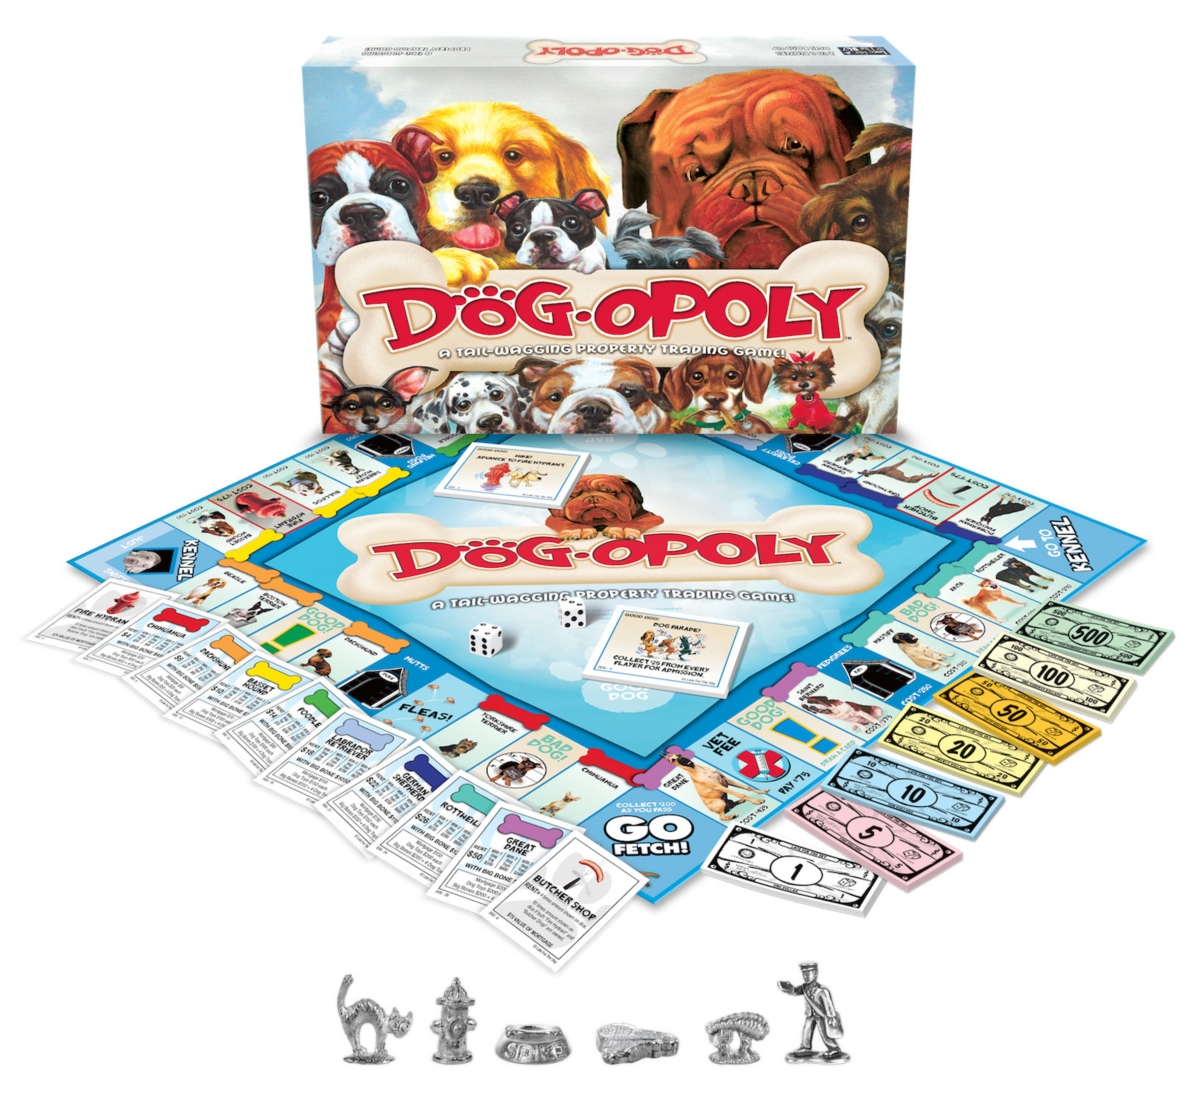 Masterpieces Puzzles Late For The Sky Dog-opoly Game In Multi